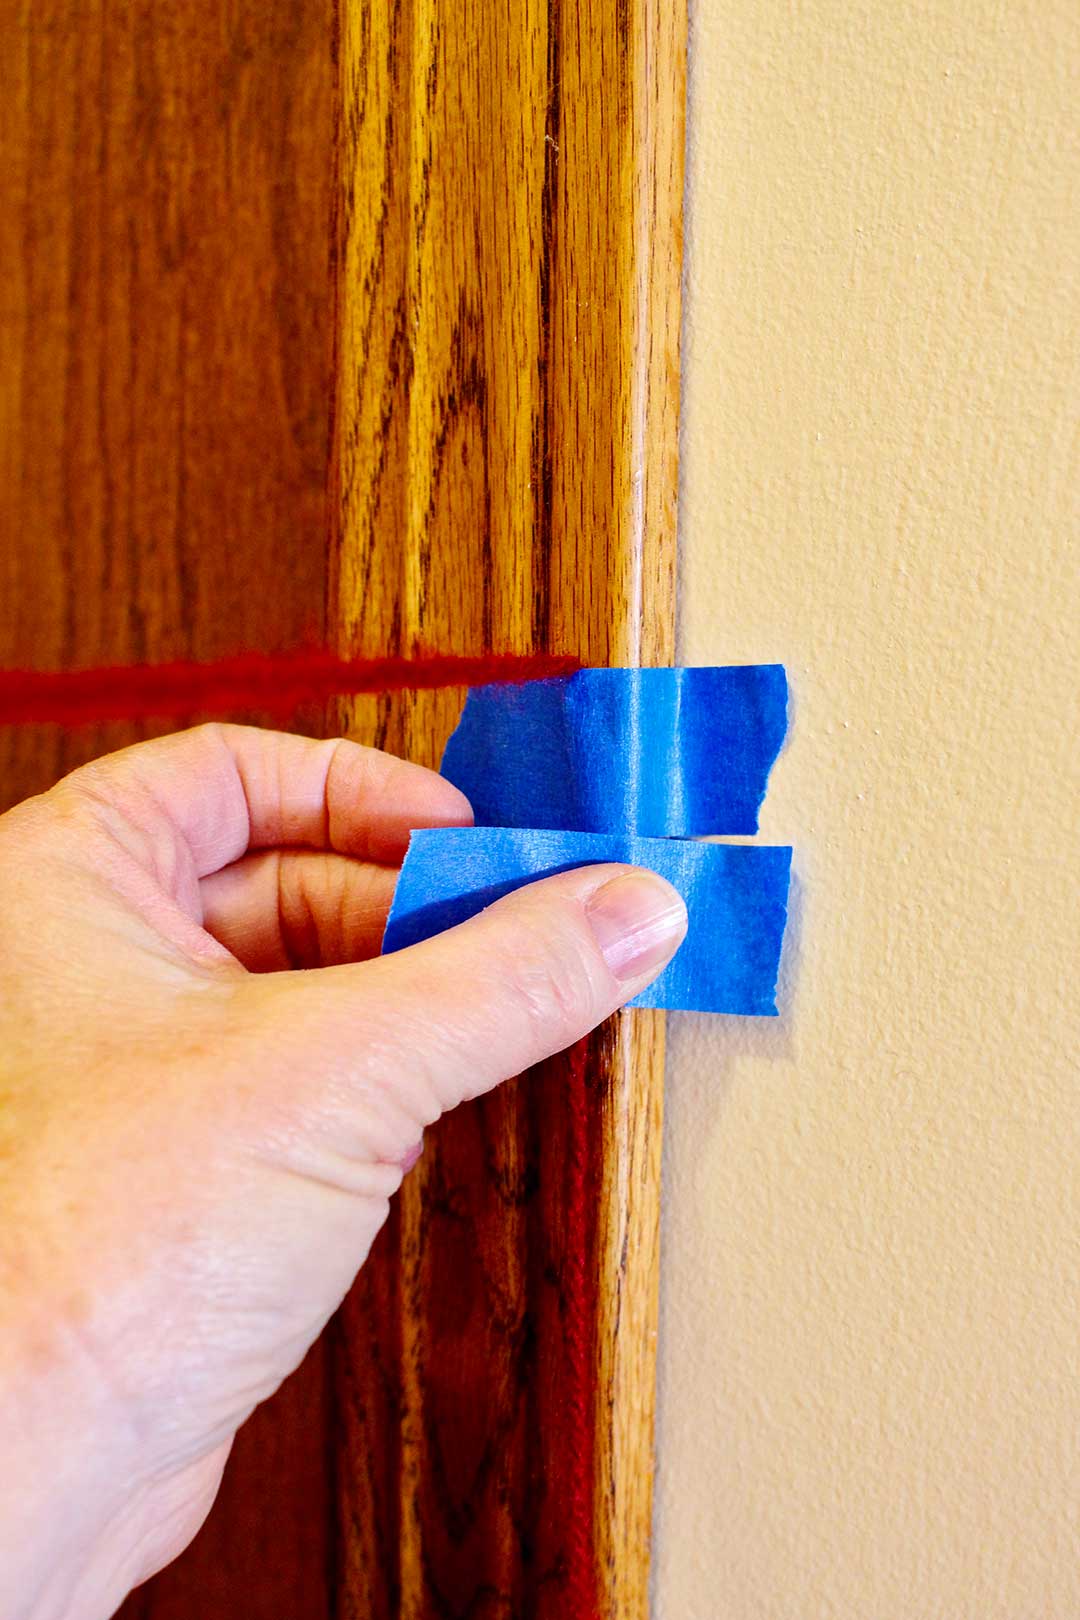 Close up view of person taping red yarn to a door frame with blue painters tape.